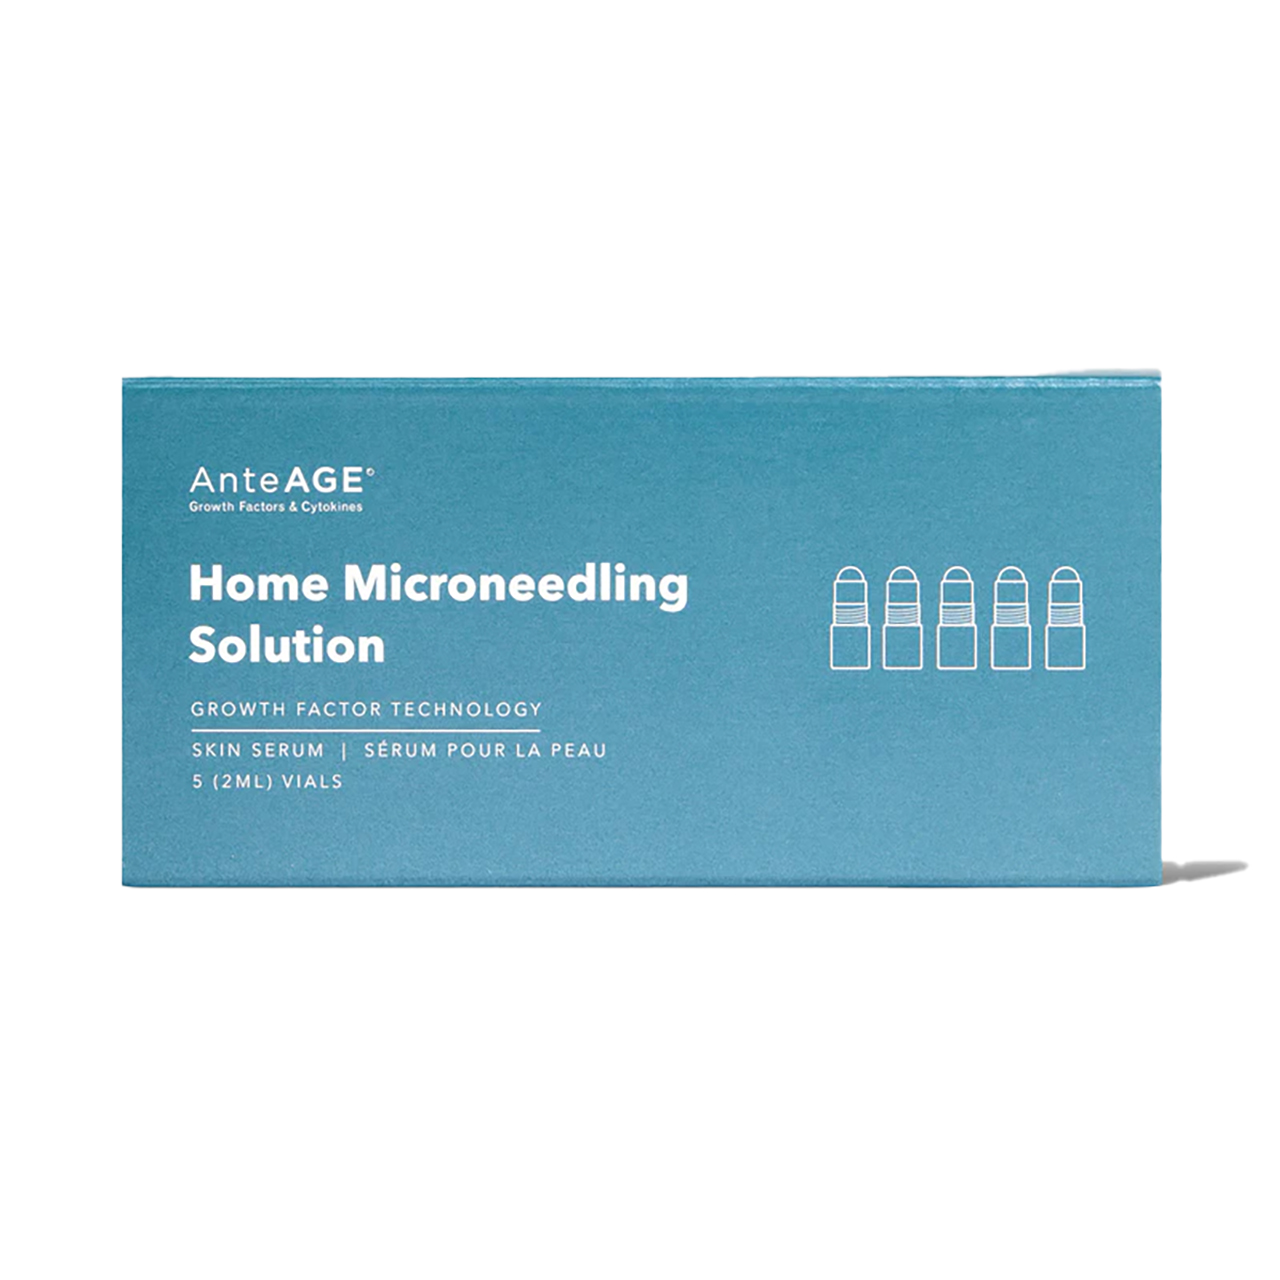 AnteAGE Home Microneedling Solution - 5 x 2 ml Questions & Answers